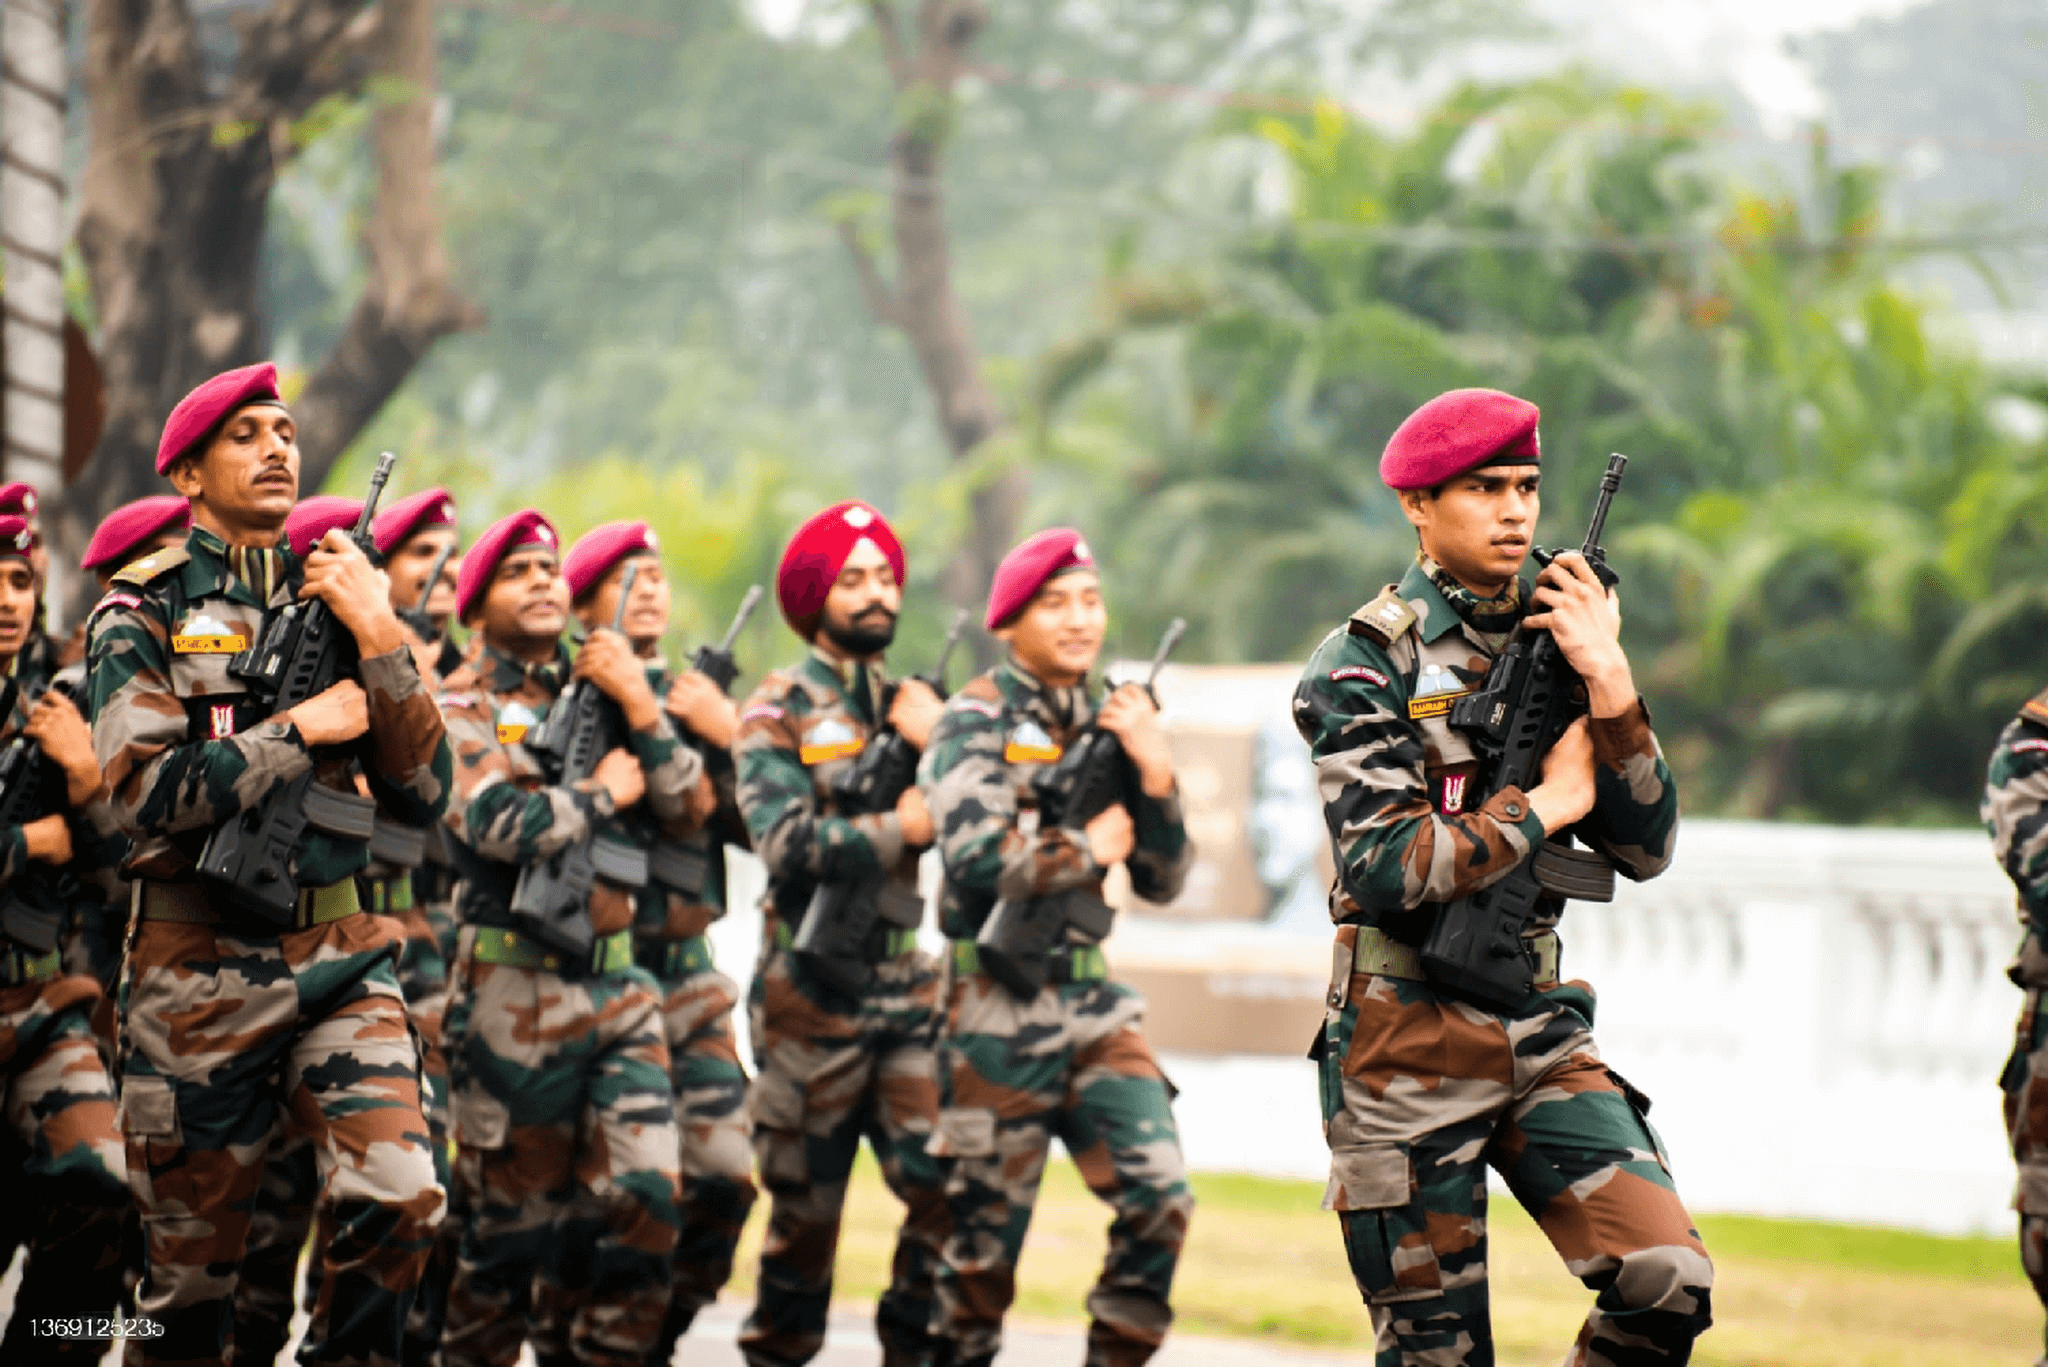 Image Showing Indian army cadets